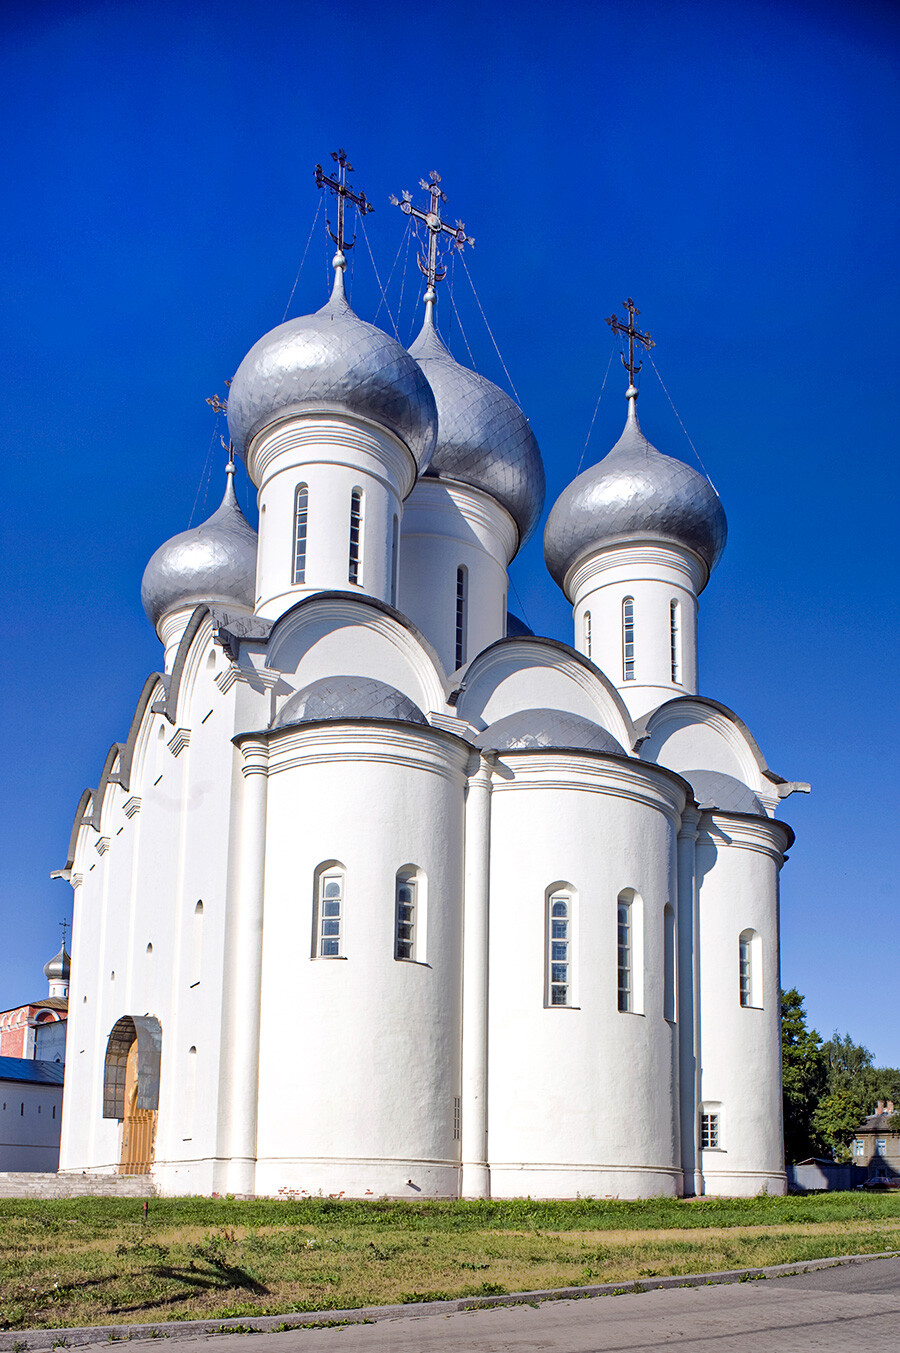 Vologda. St. Sophia Cathedral, east view. August 3, 2011